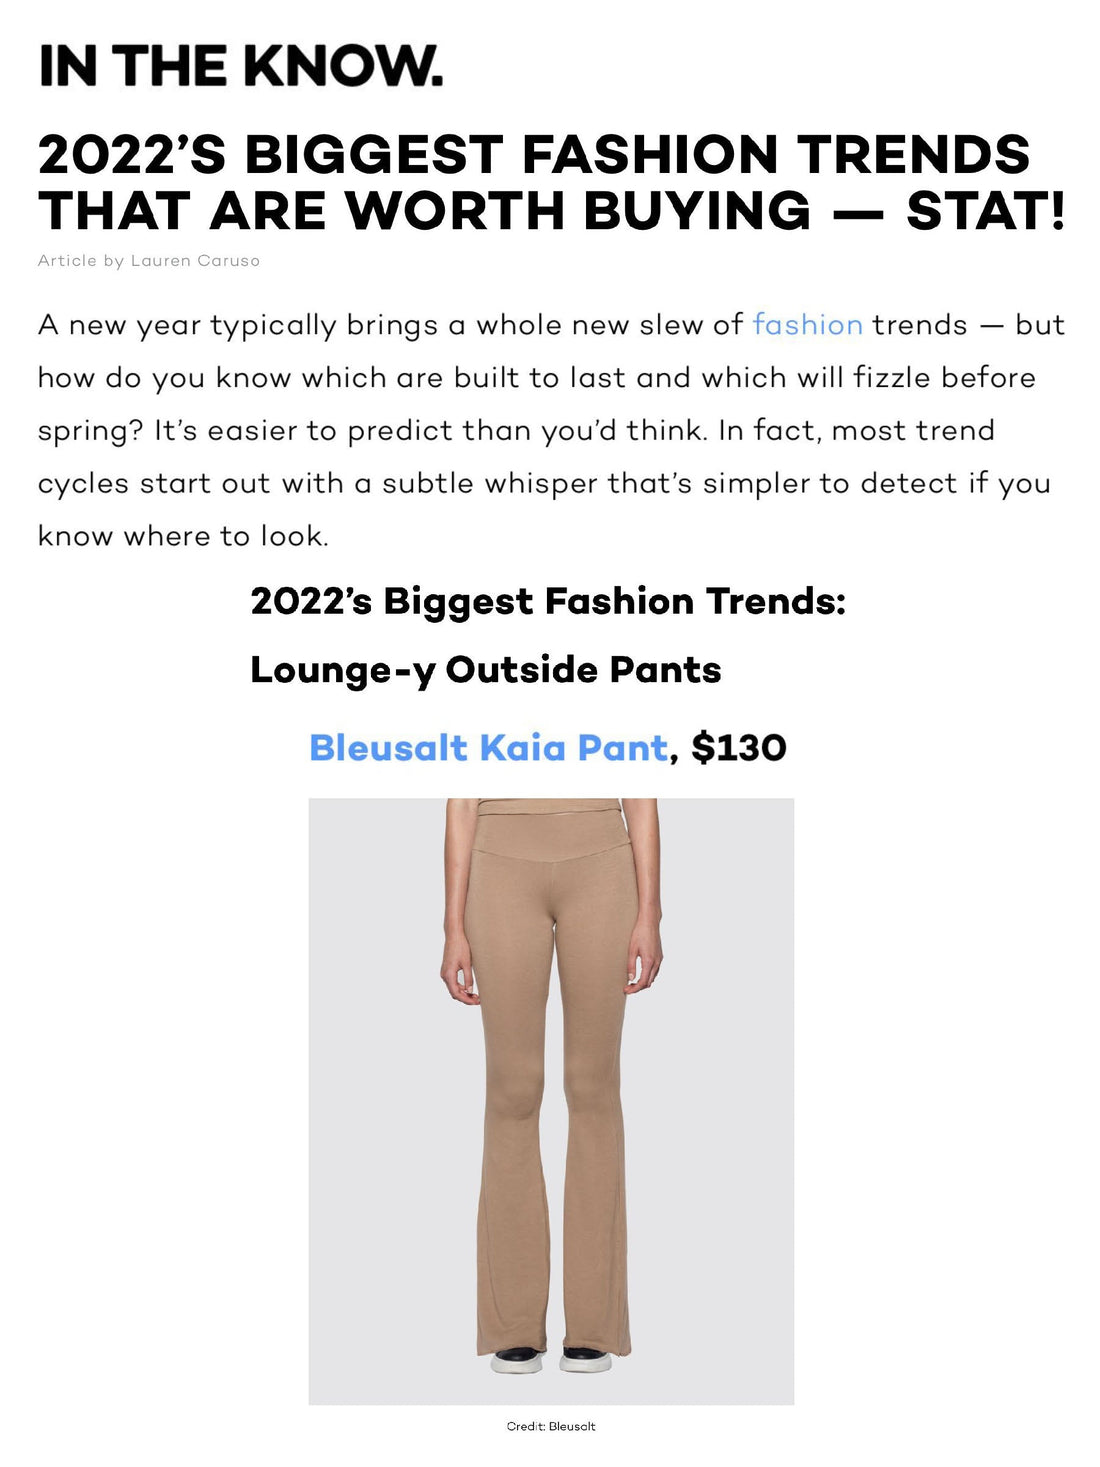 2022's Biggest Fashion Trends That Are Worth Buying - Stat!-Bleusalt